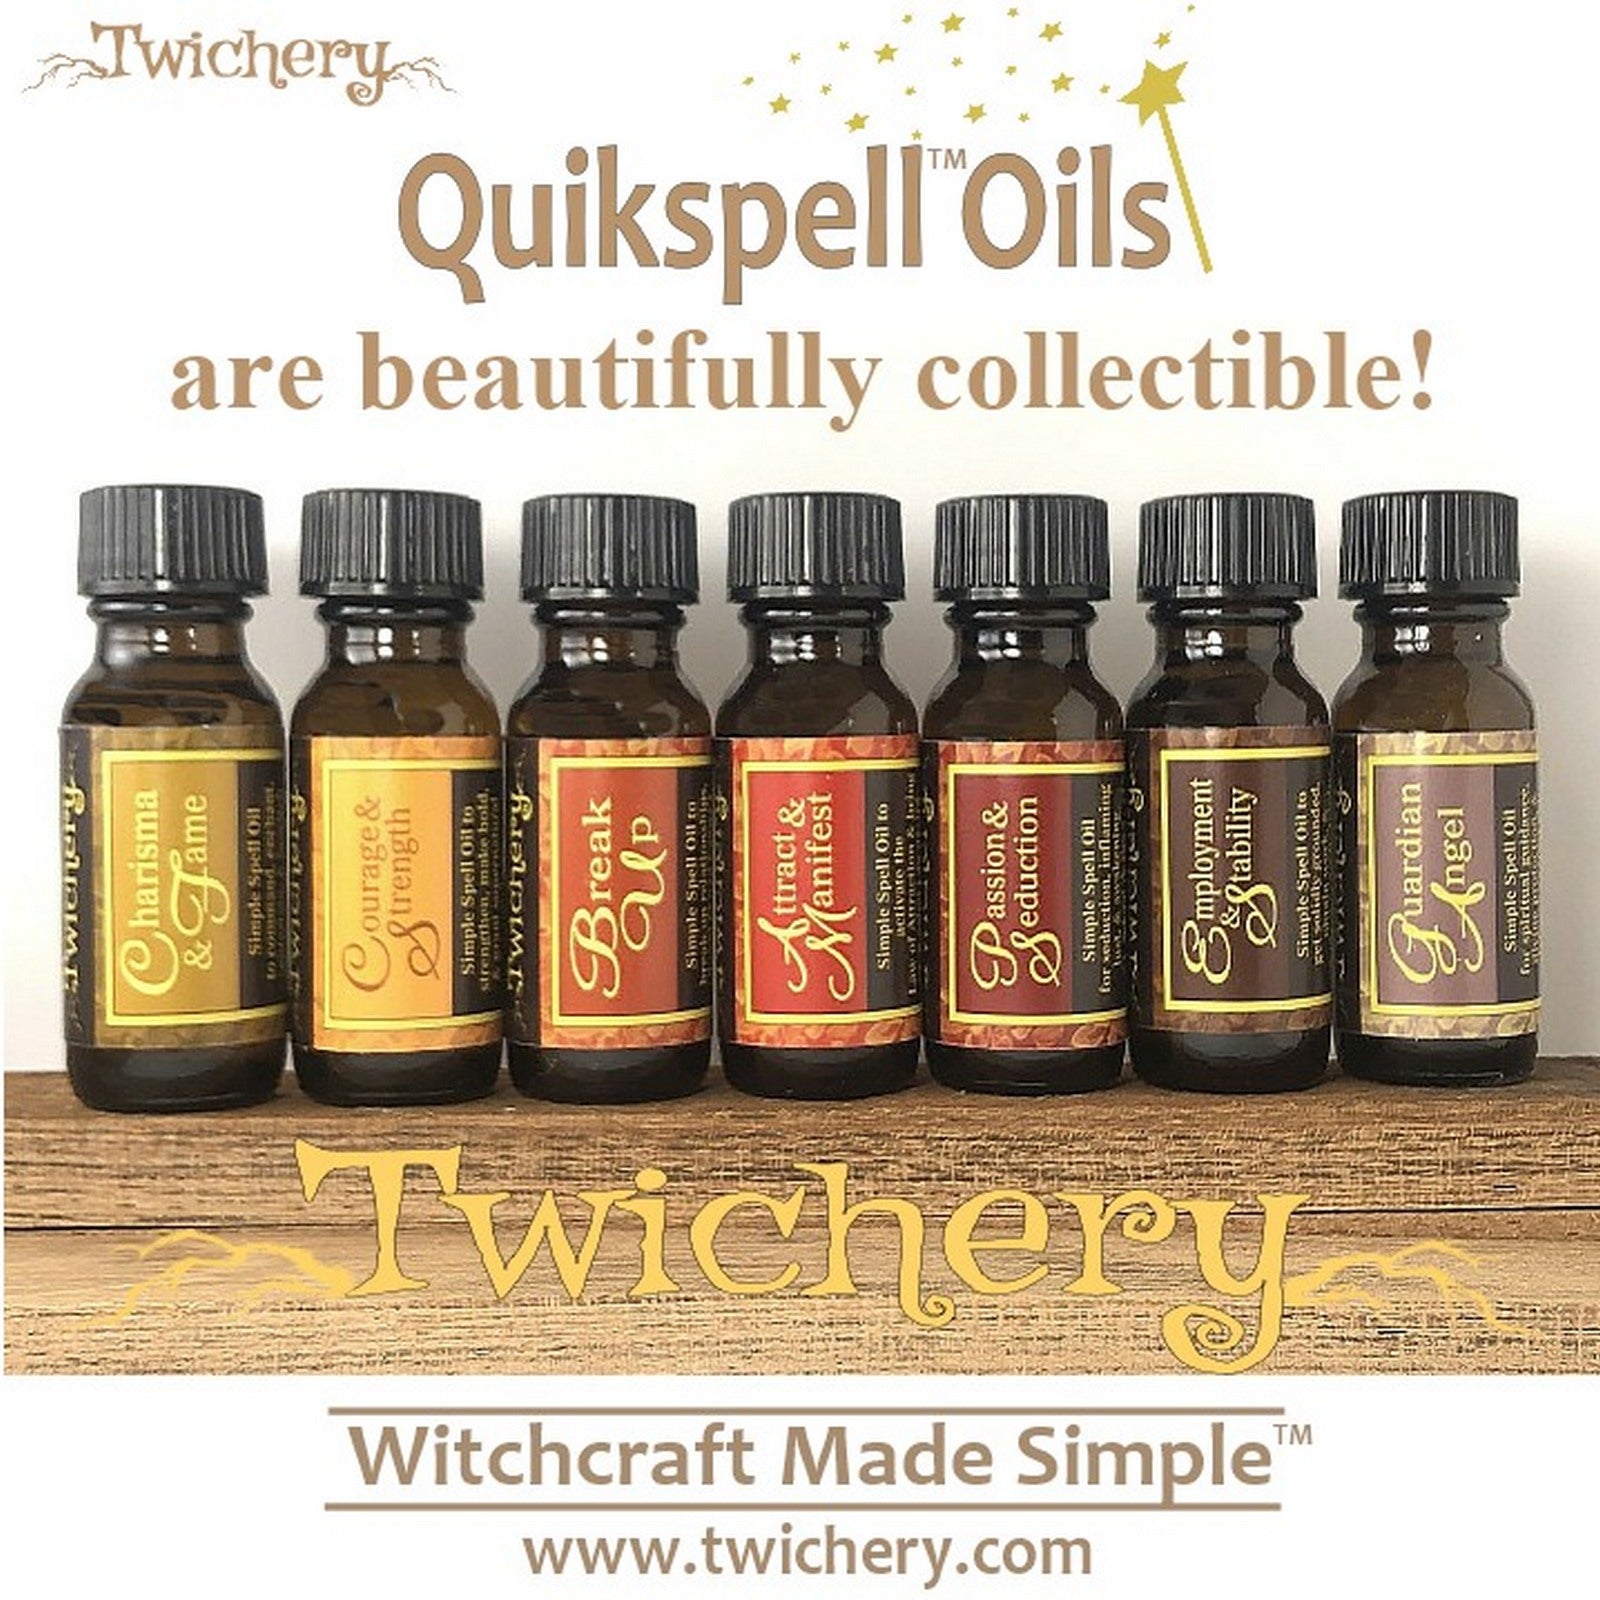 Twichery Quikspell Oils cover the entire gambit of human needs. Do it magickally with Twichery! Hoodoo Voodoo, Wicca, Pagan, Witchcraft Made Simple